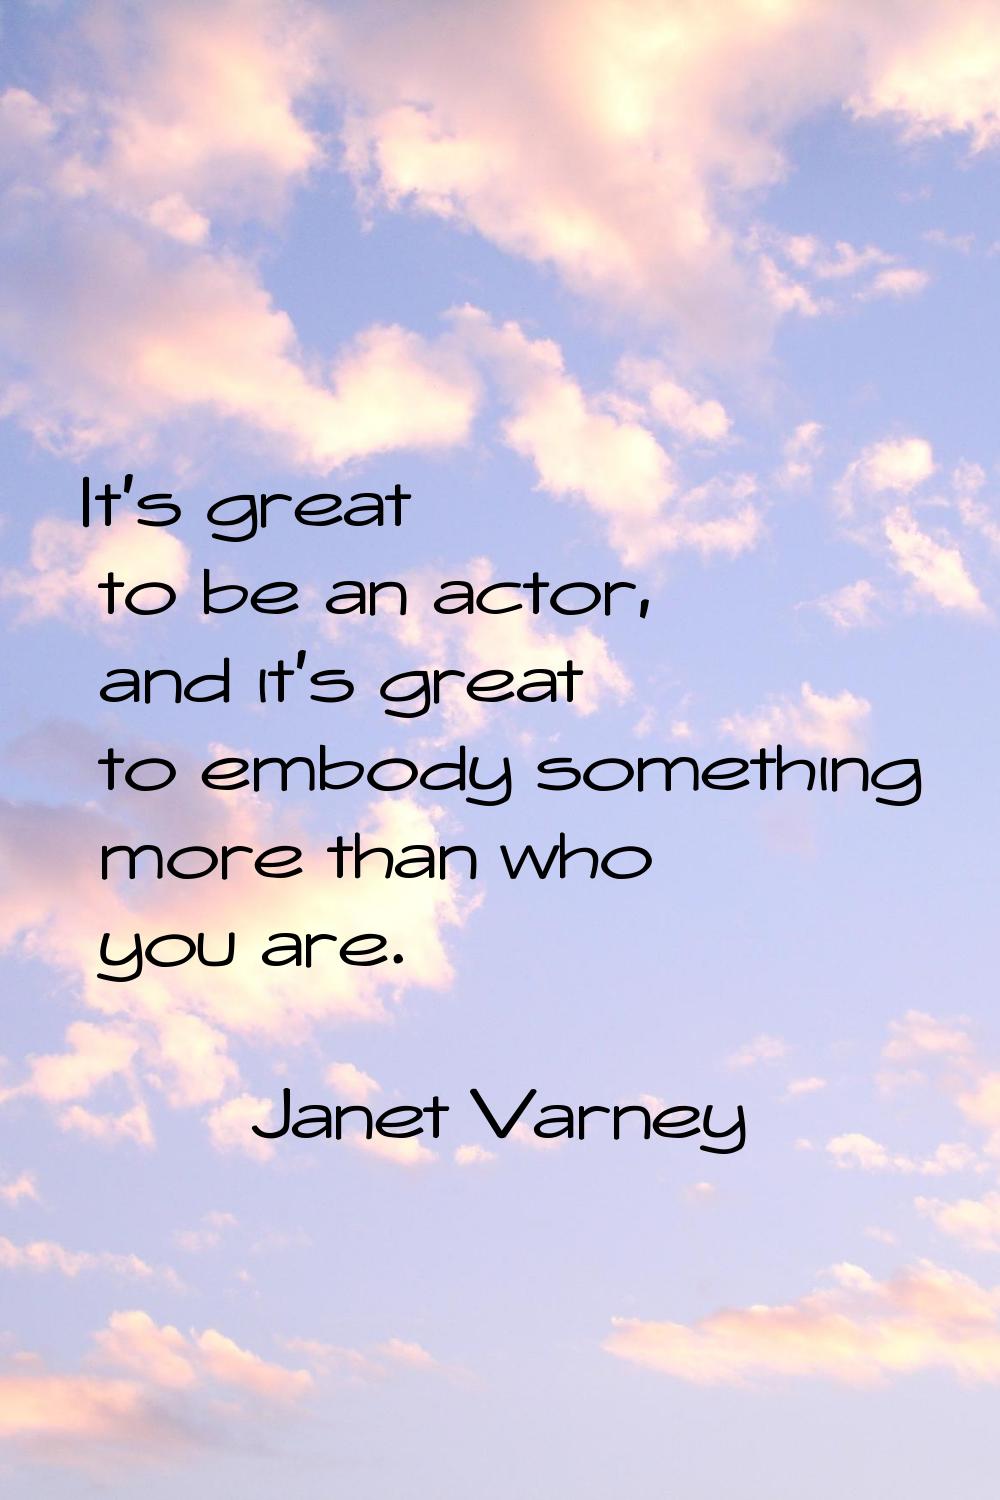 It's great to be an actor, and it's great to embody something more than who you are.